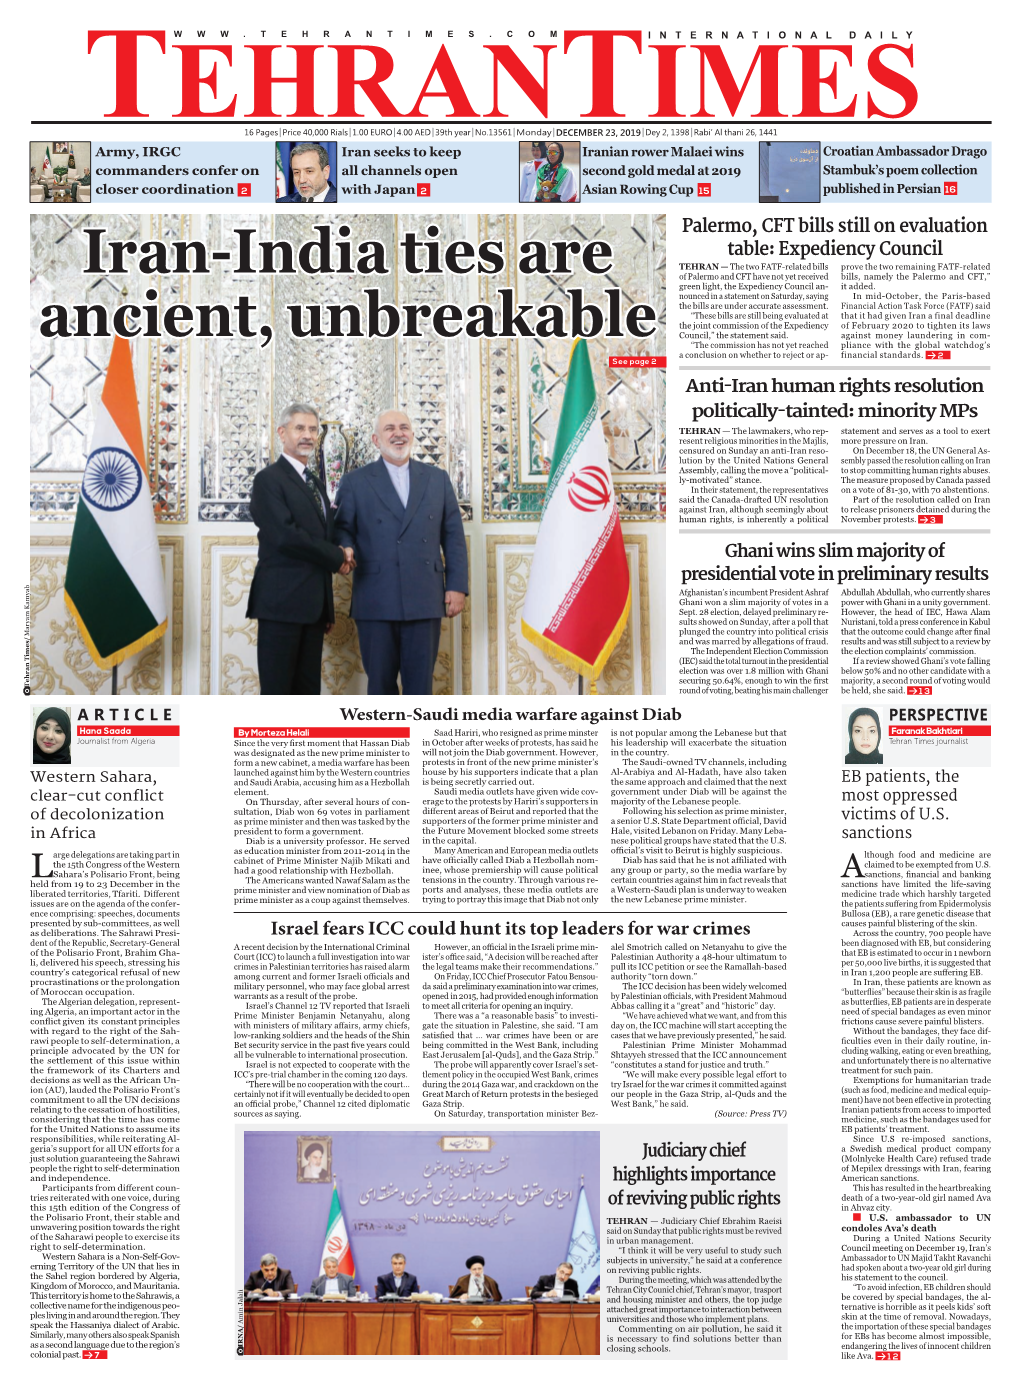 Iran-India Ties Are Ancient, Unbreakable